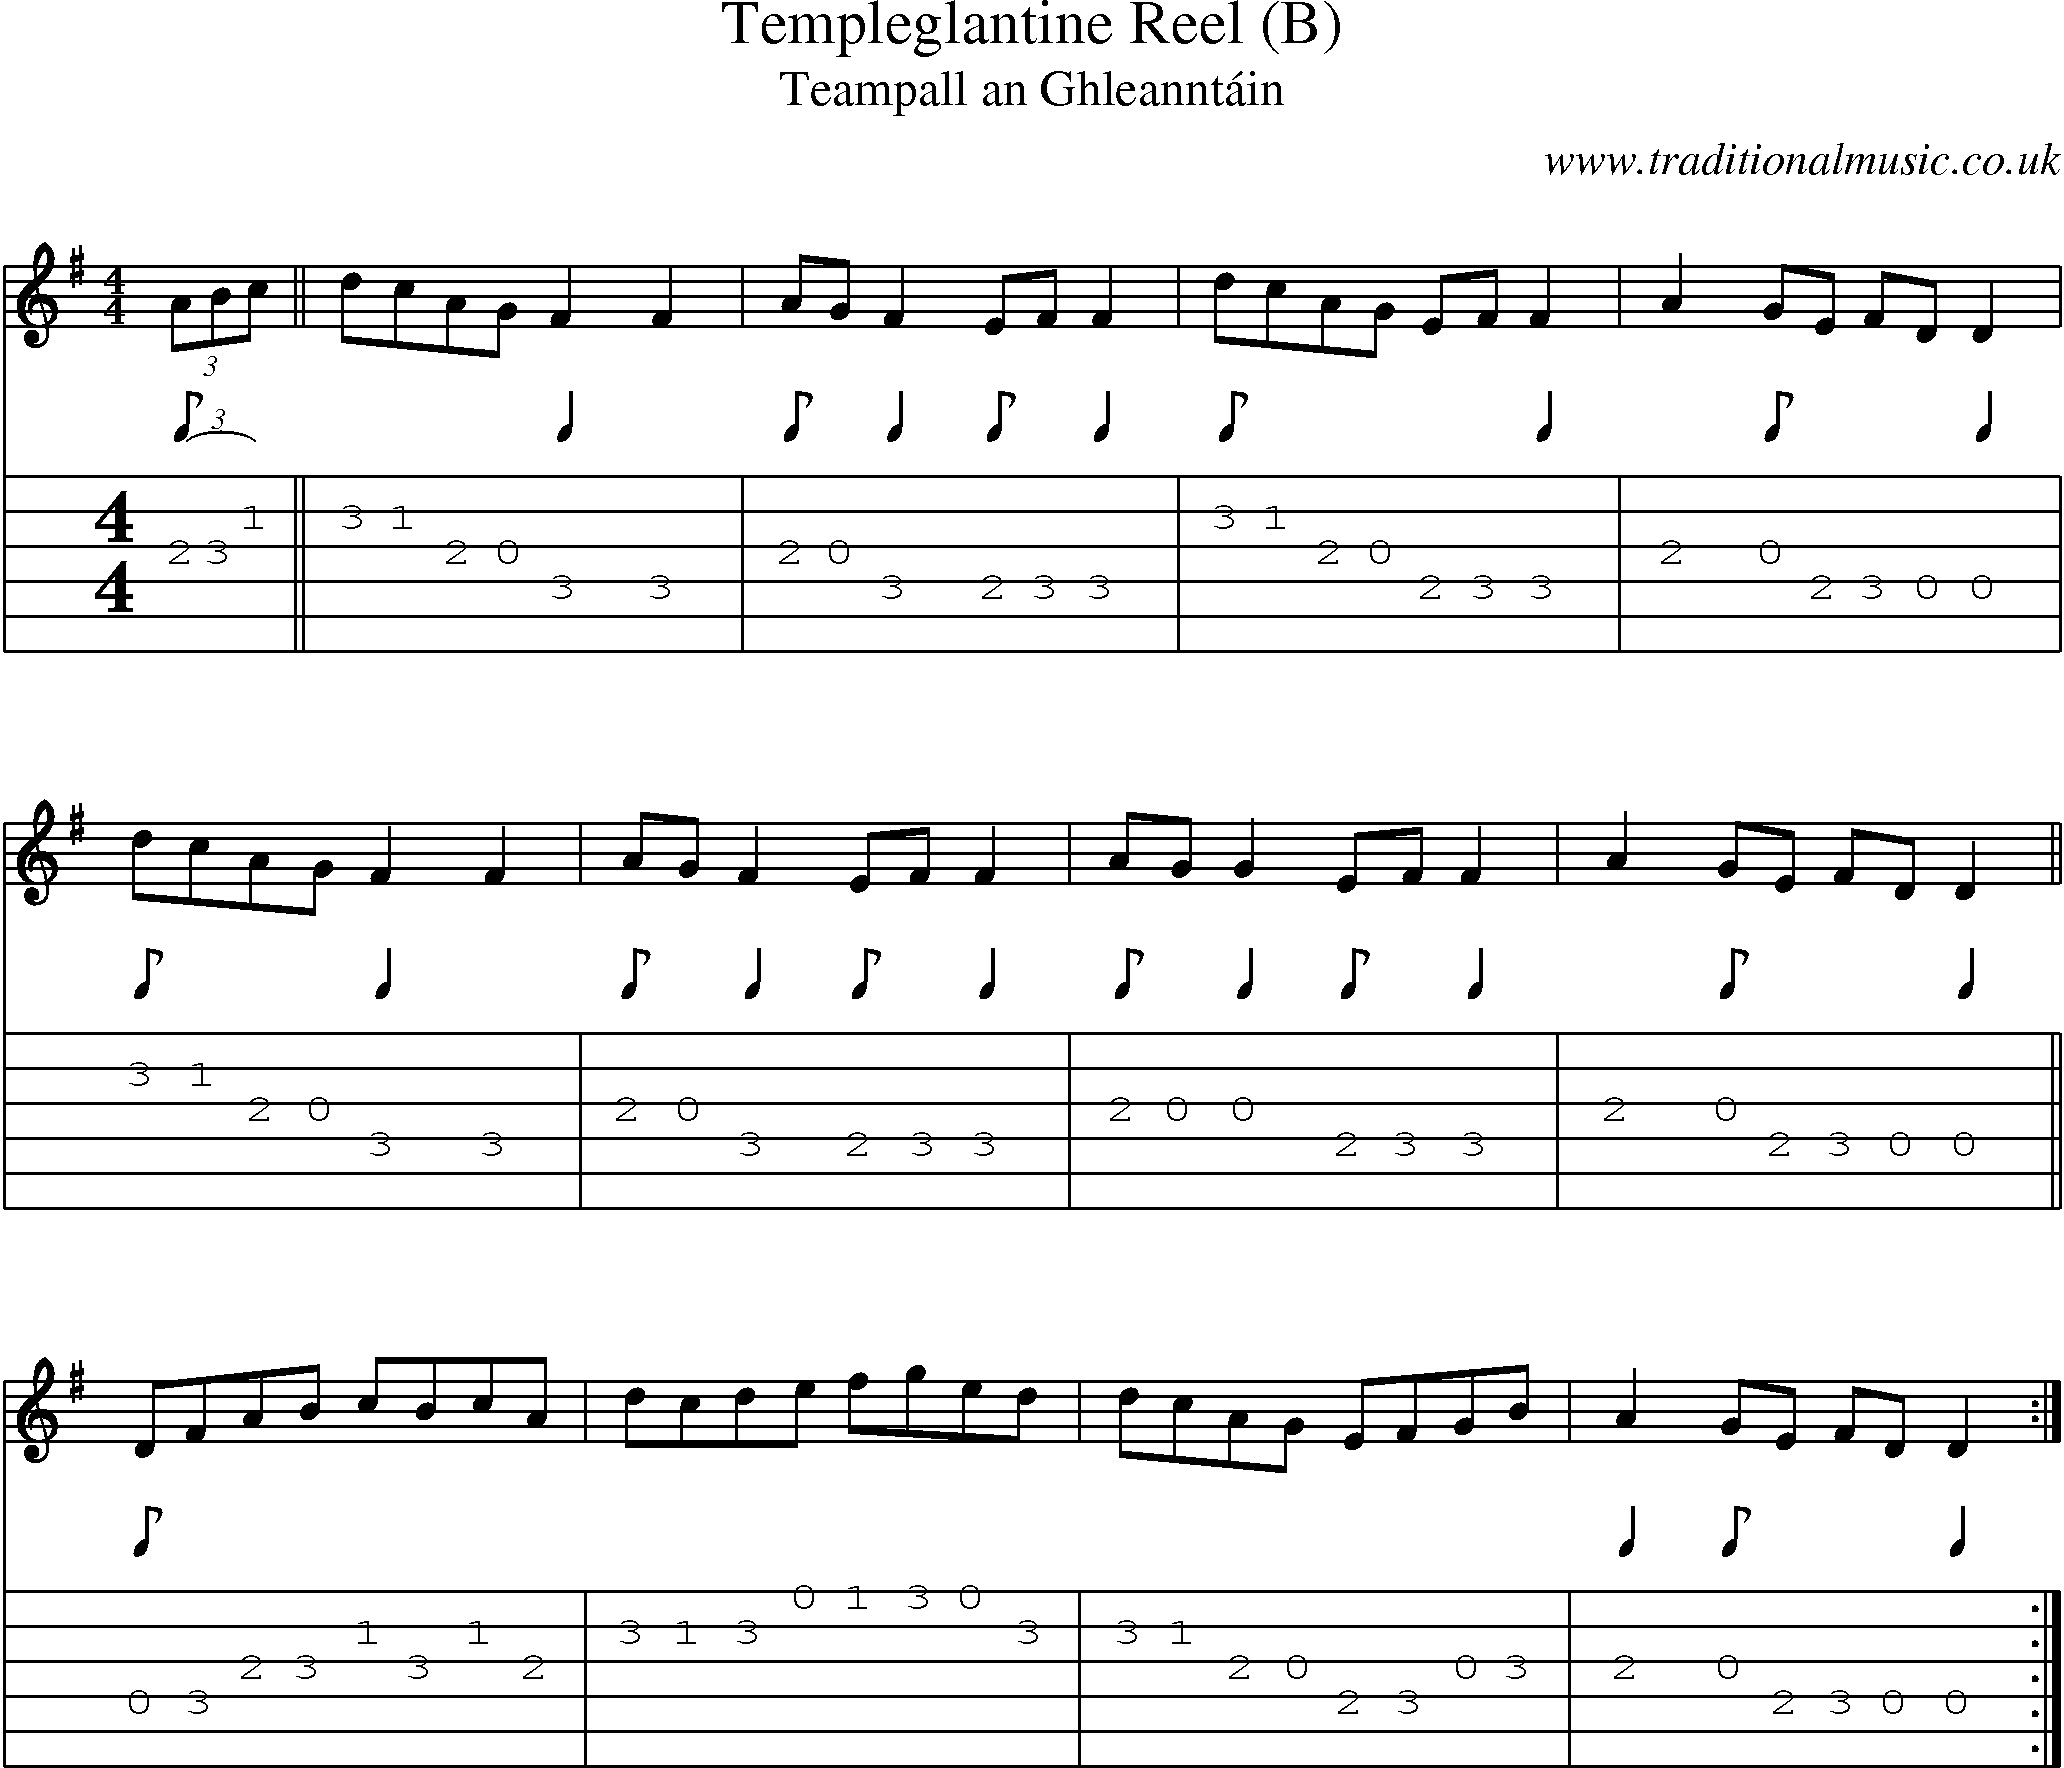 Music Score and Guitar Tabs for Templeglantine Reel (b)